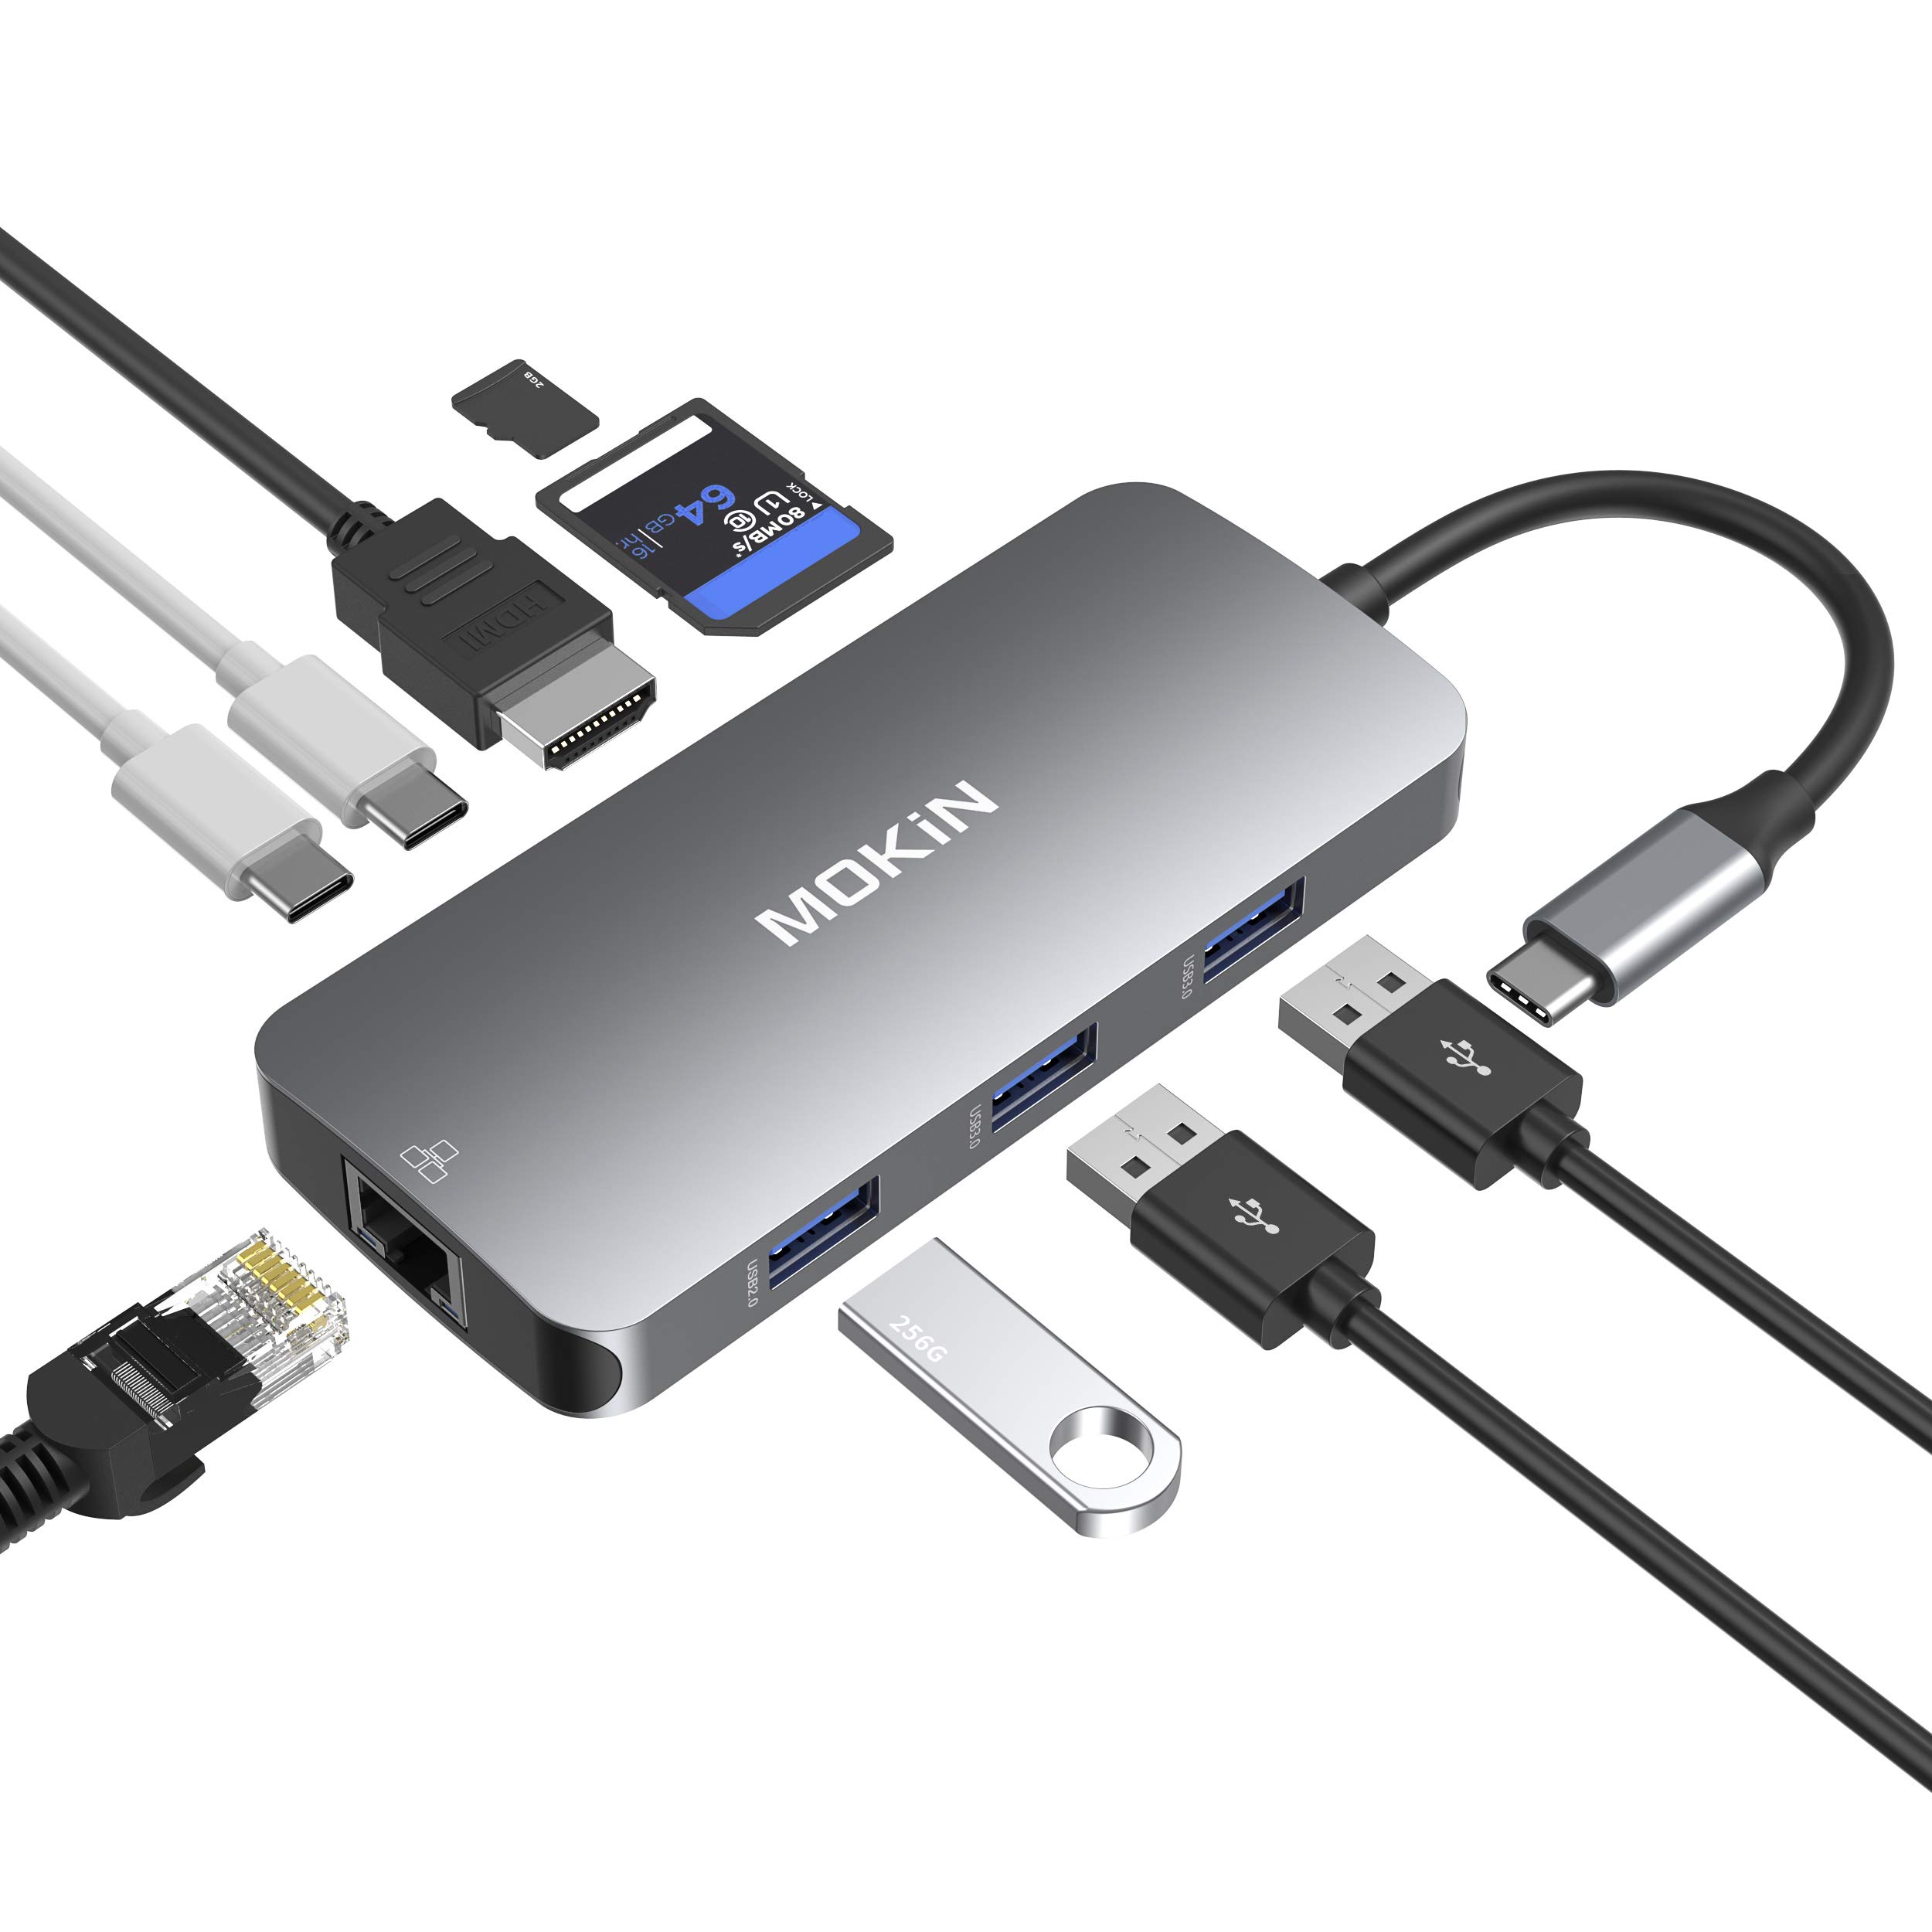 Disconnect the USB C hub and reconnect it.
Try using a different USB port on the computer.